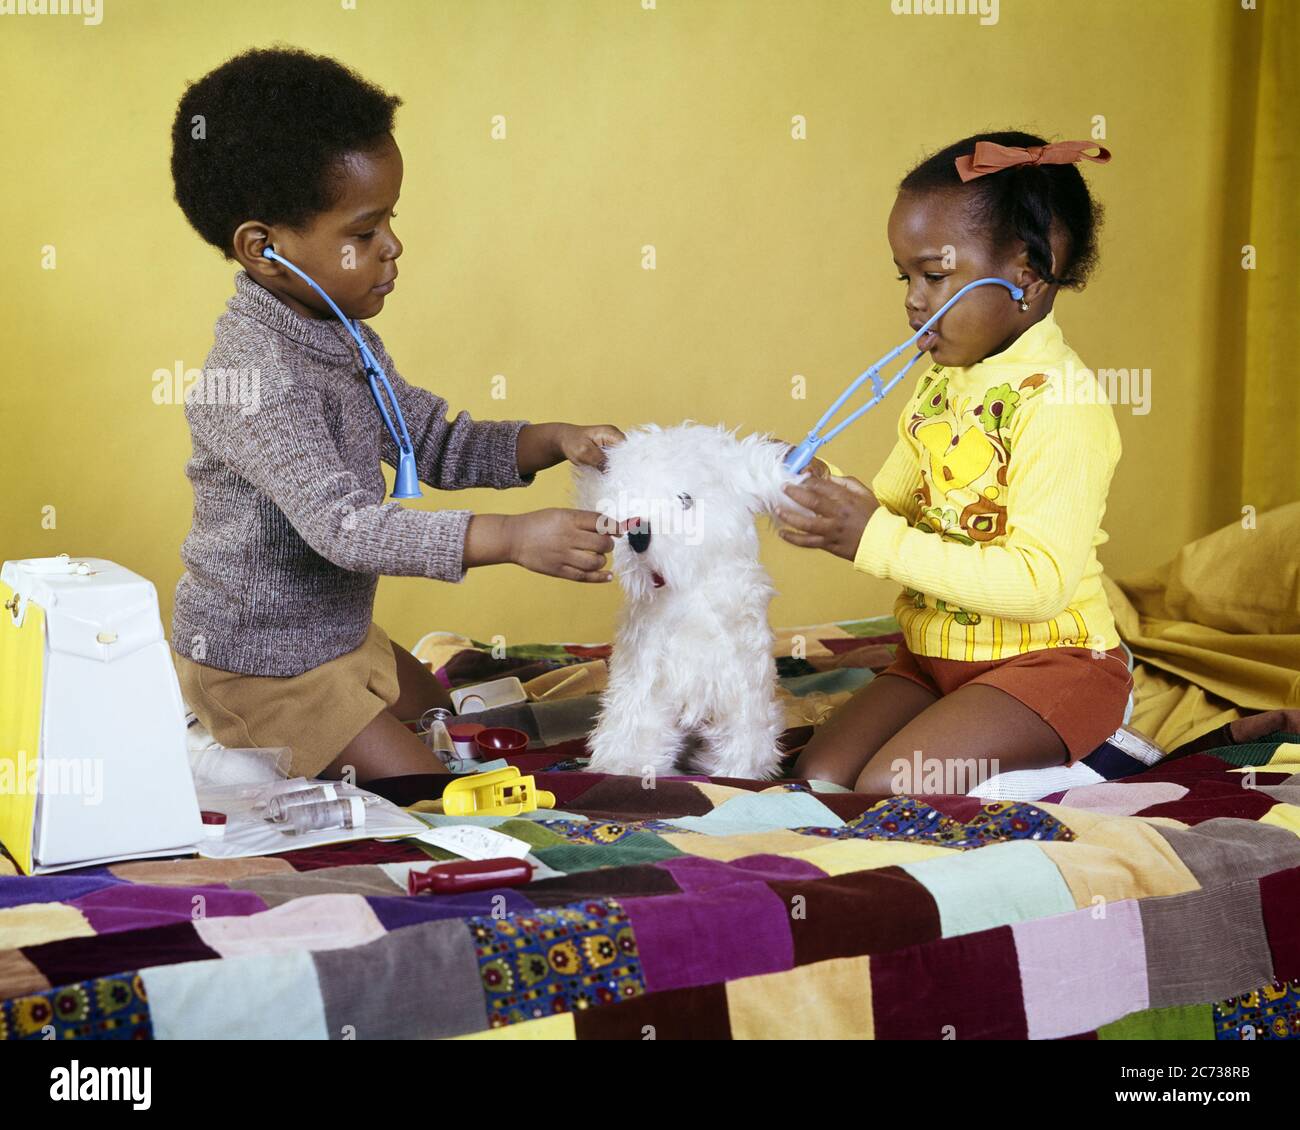 1970s AFRICAN-AMERICAN BOY AND GIRL BROTHER AND SISTER PLAYING VETERINARIAN DOCTOR WITH TOY STETHOSCOPE AND STUFFED ANIMAL DOG - kj5029 PHT001 HARS HOME LIFE COPY SPACE FRIENDSHIP HALF-LENGTH INSPIRATION MALES SIBLINGS SISTERS STETHOSCOPE DREAMS MAMMALS HEALING AFRICAN-AMERICANS AFRICAN-AMERICAN AND CANINES BLACK ETHNICITY OCCUPATIONS SIBLING POOCH CONNECTION CONCEPTUAL TREATING VETERINARIAN ANONYMOUS CANINE COOPERATION GROWTH JUVENILES MAMMAL TOGETHERNESS OLD FASHIONED AFRICAN AMERICANS Stock Photo